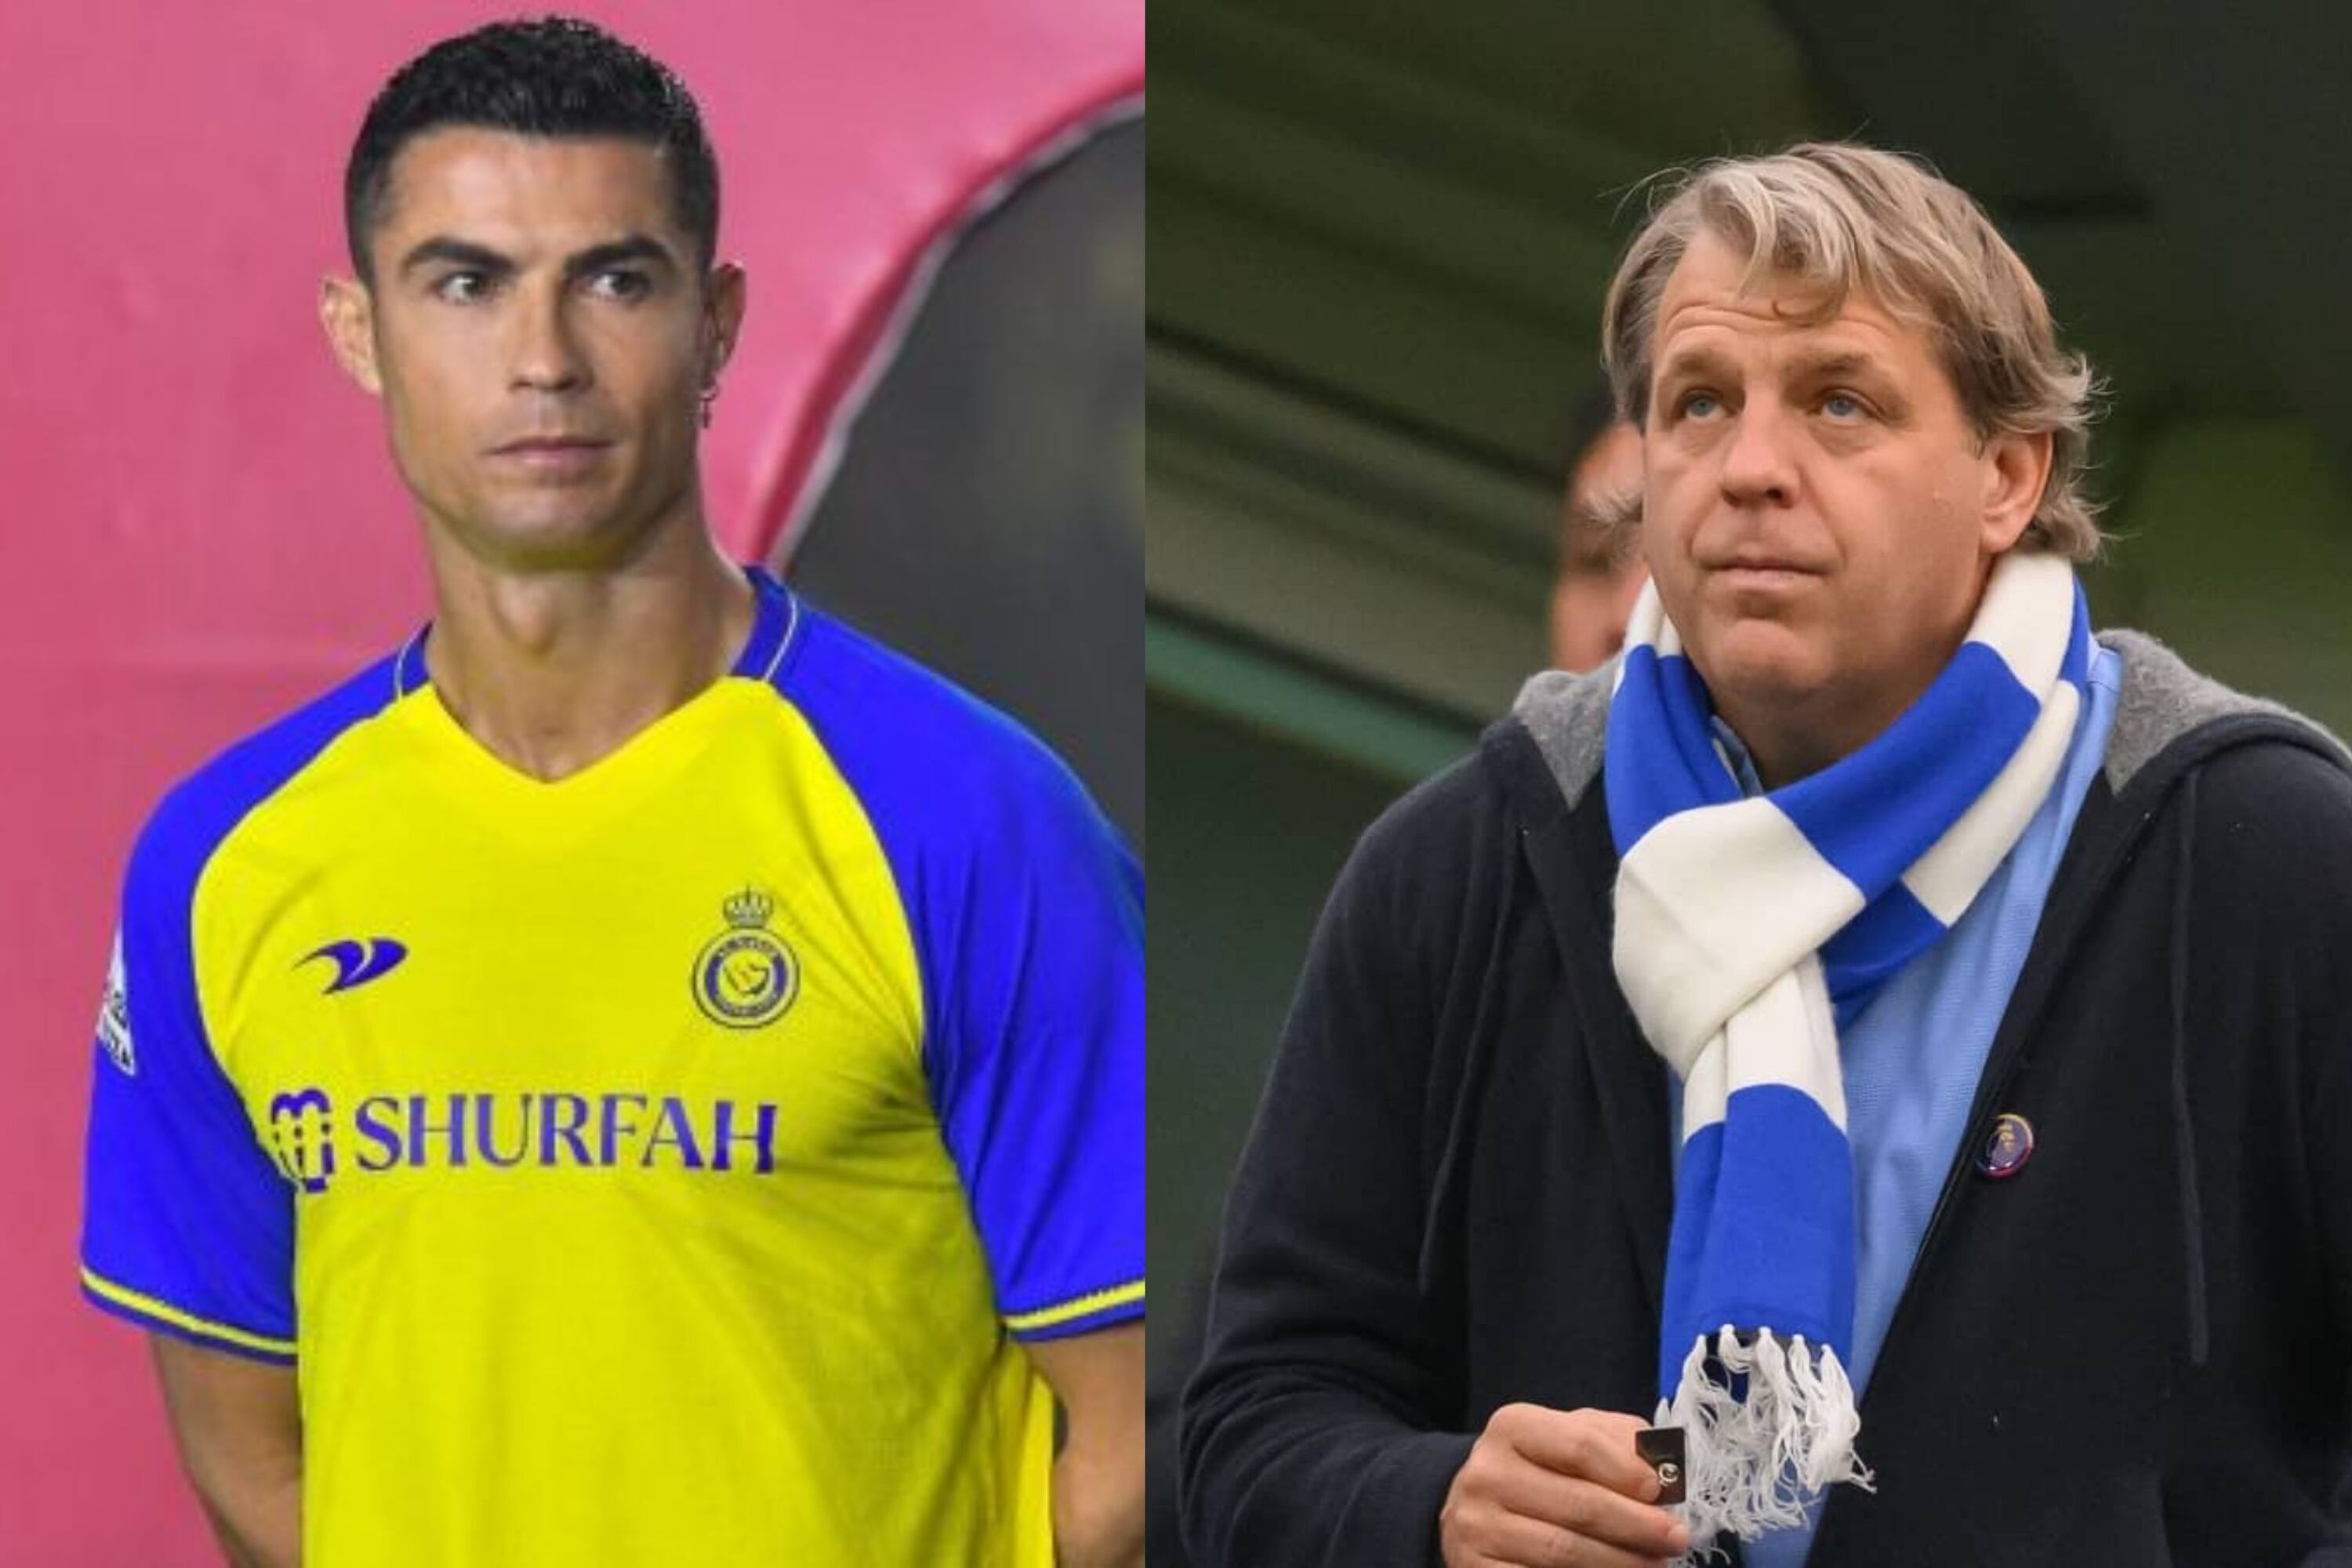 While Cristiano left for free, the amount Chelsea would get for selling two stars to Saudi Arabia